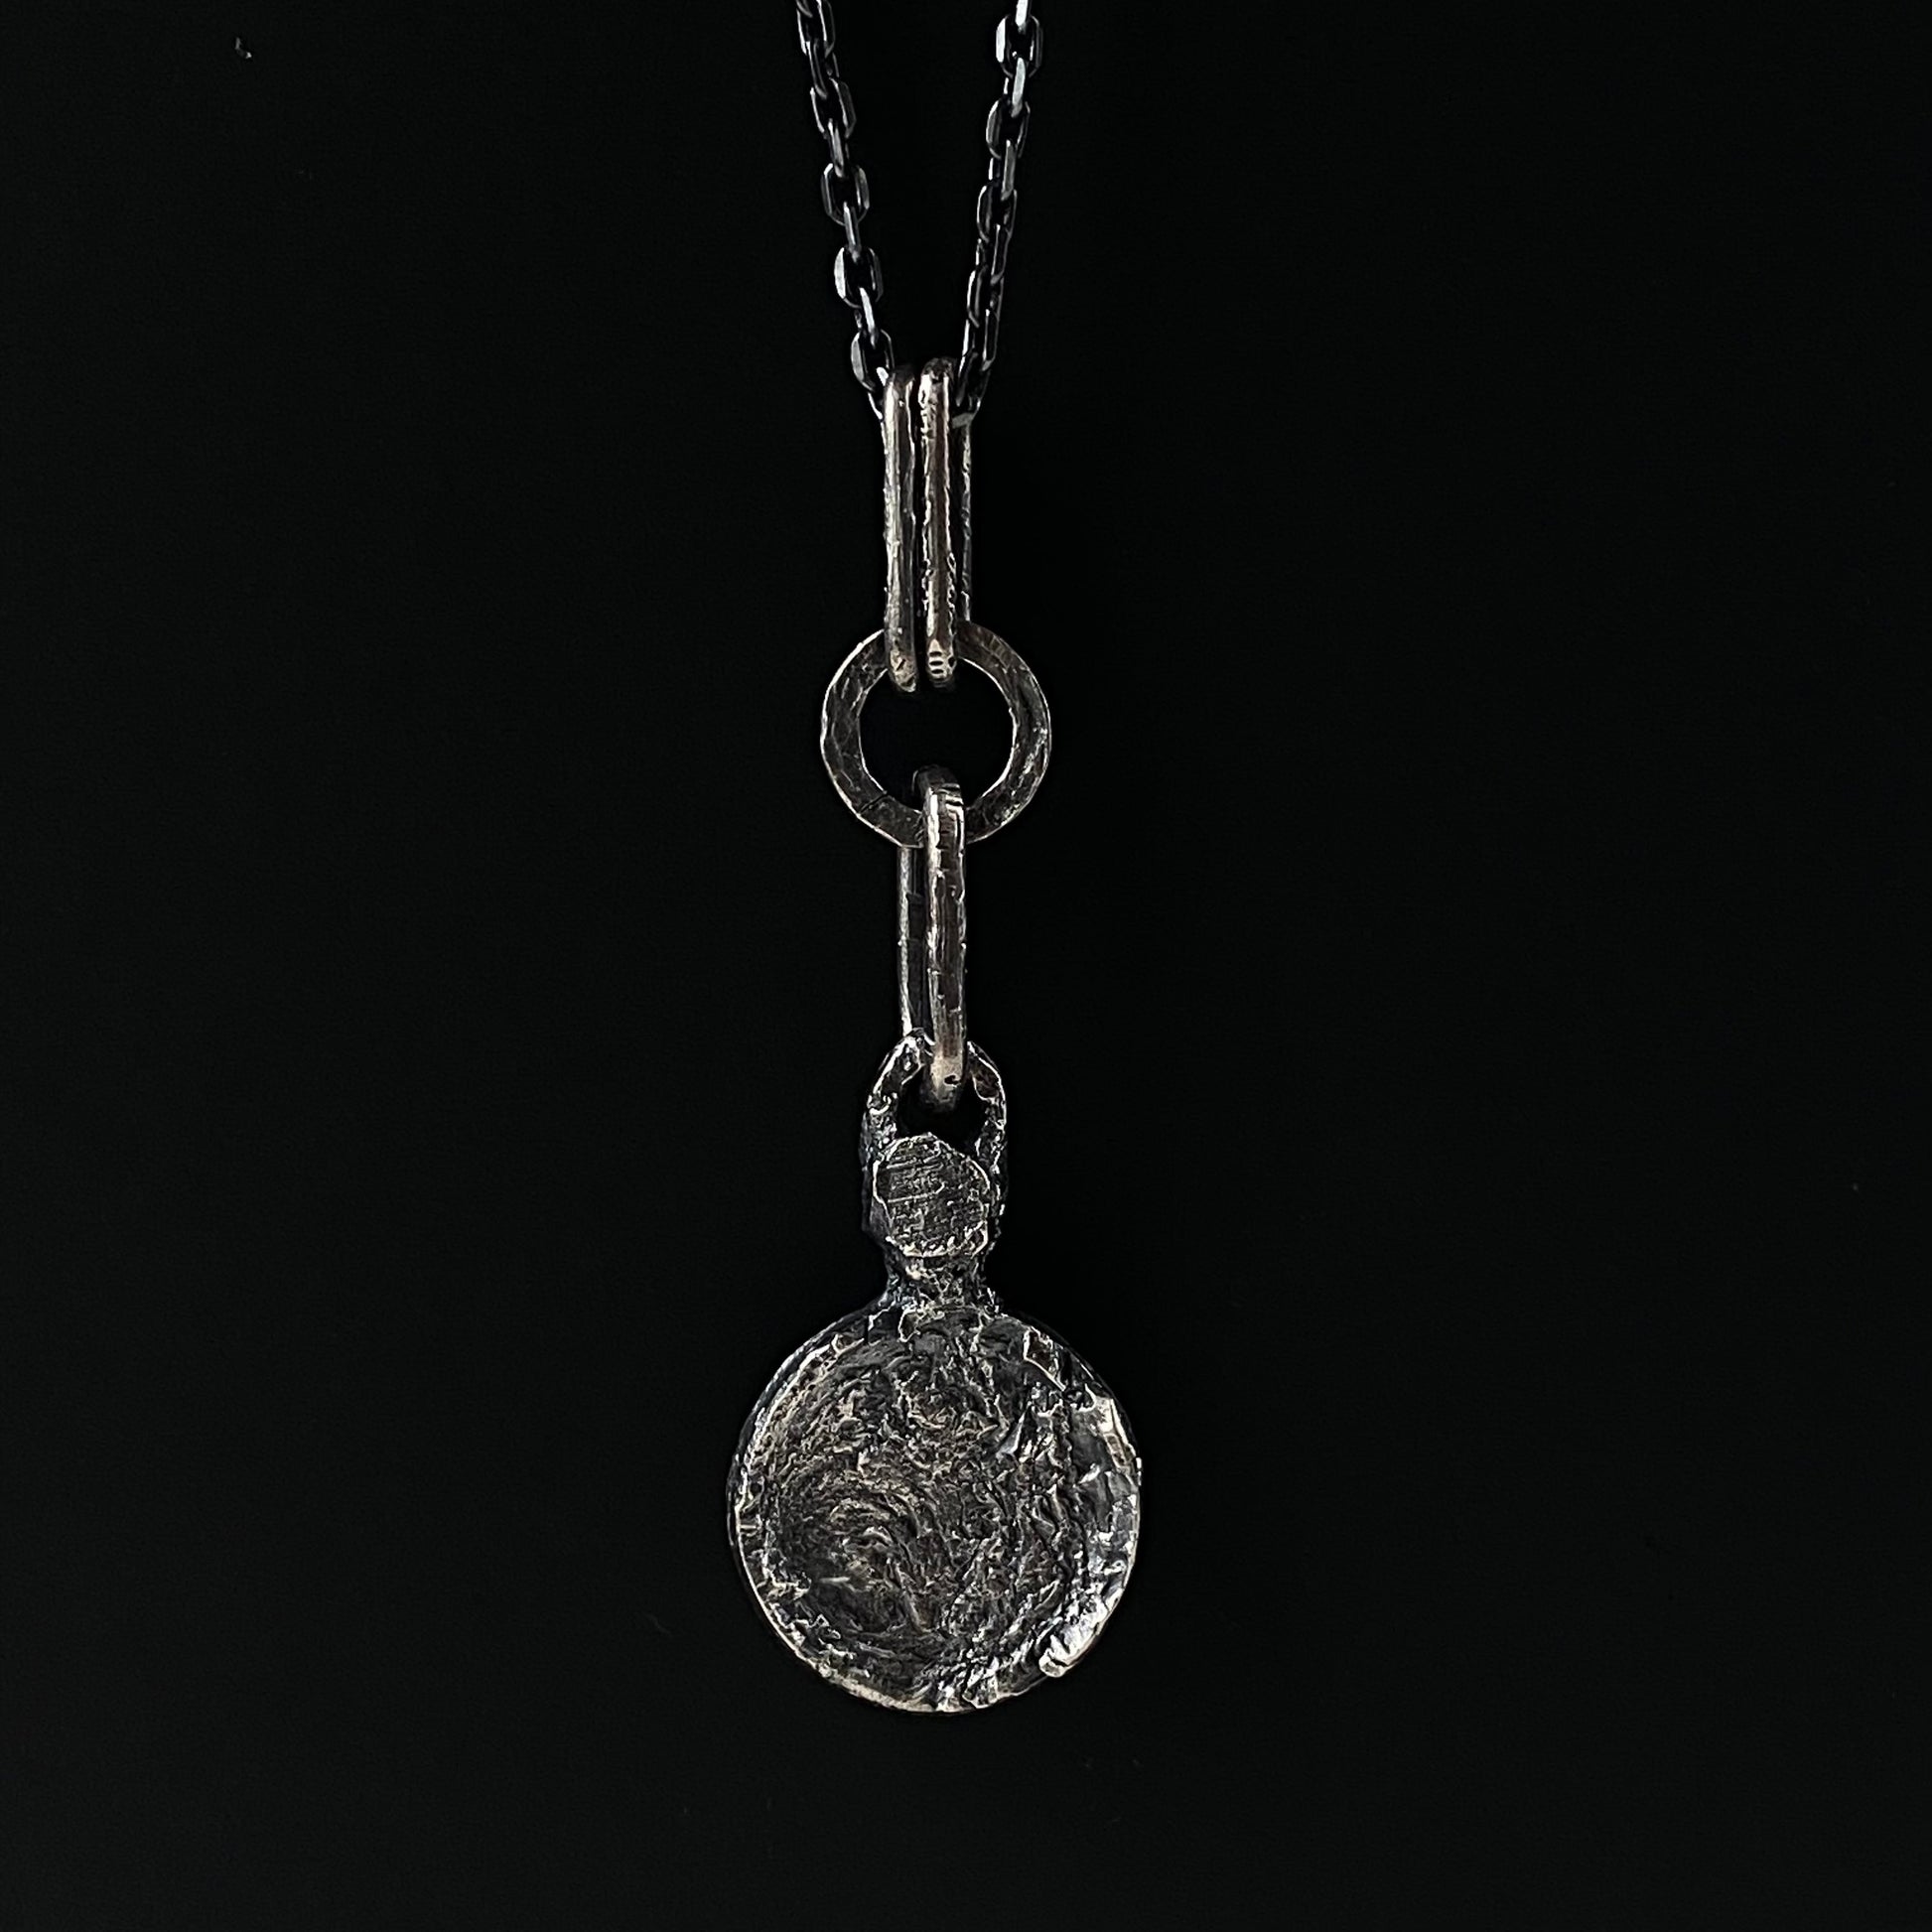 Tempus pendant-textured round pendant with unusual handmade link combination and black chain Charms & Pendants Project50g 